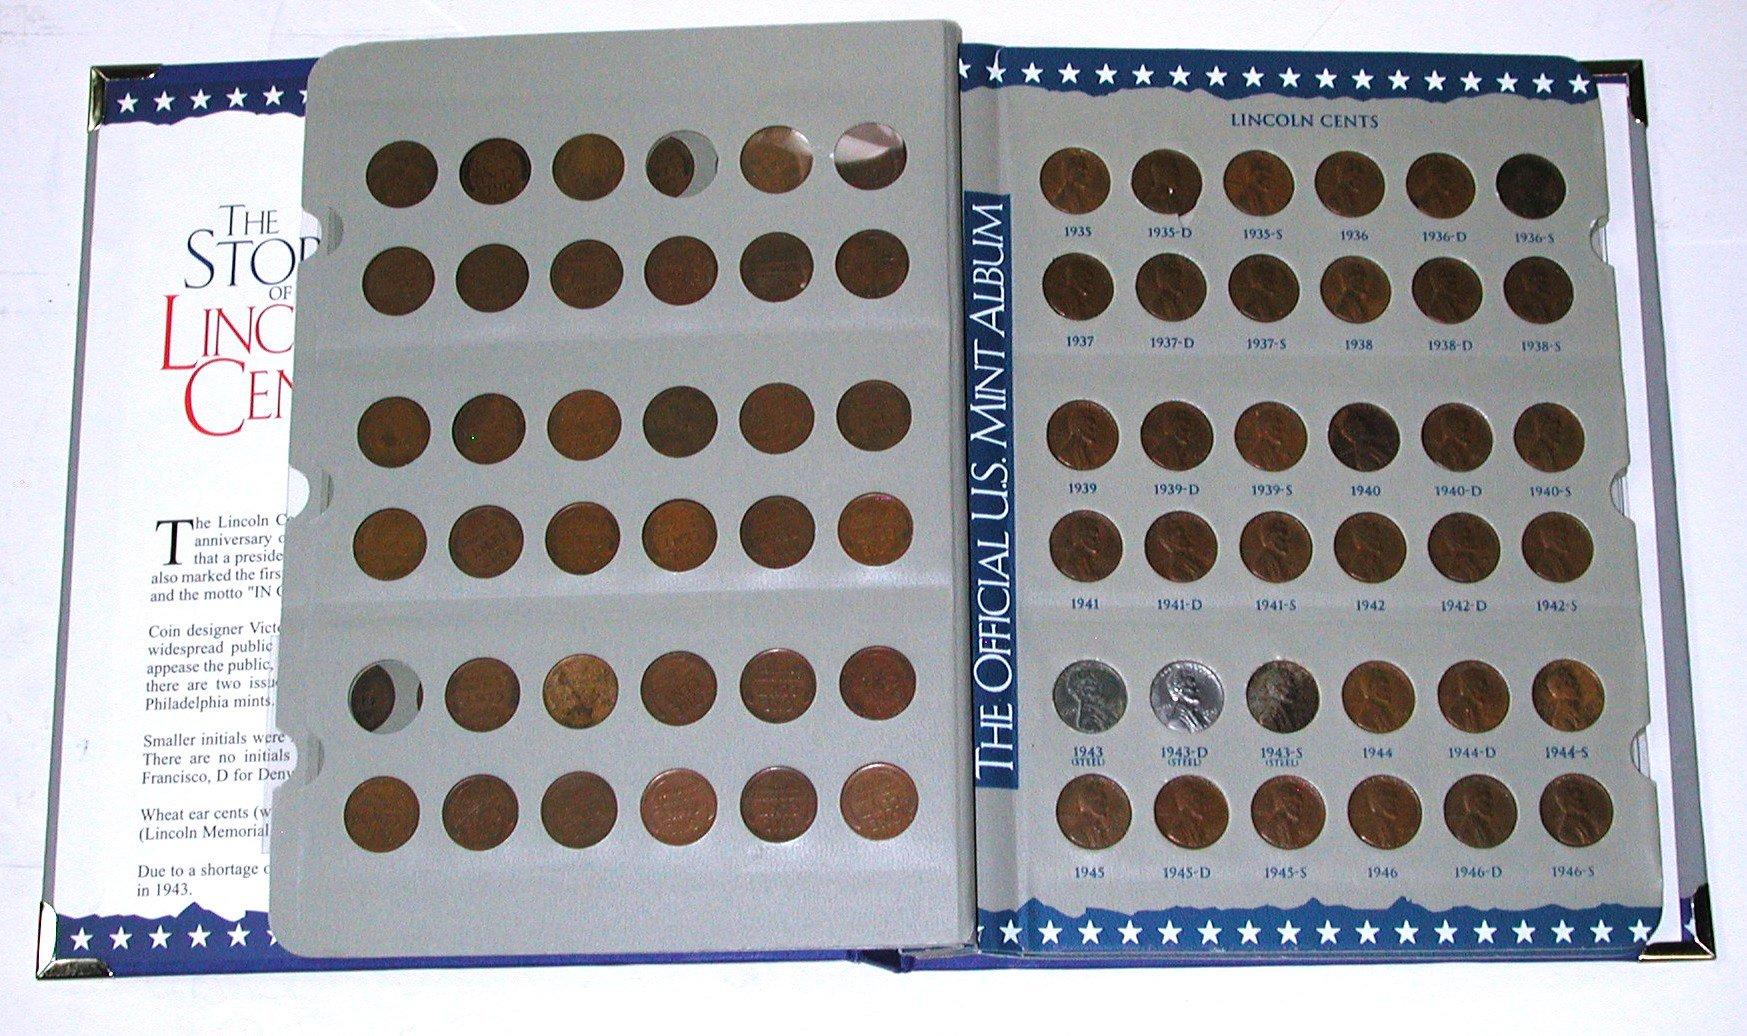 PARTIAL SET of WHEAT CENTS in ALBUM - 1909 to 1958-D